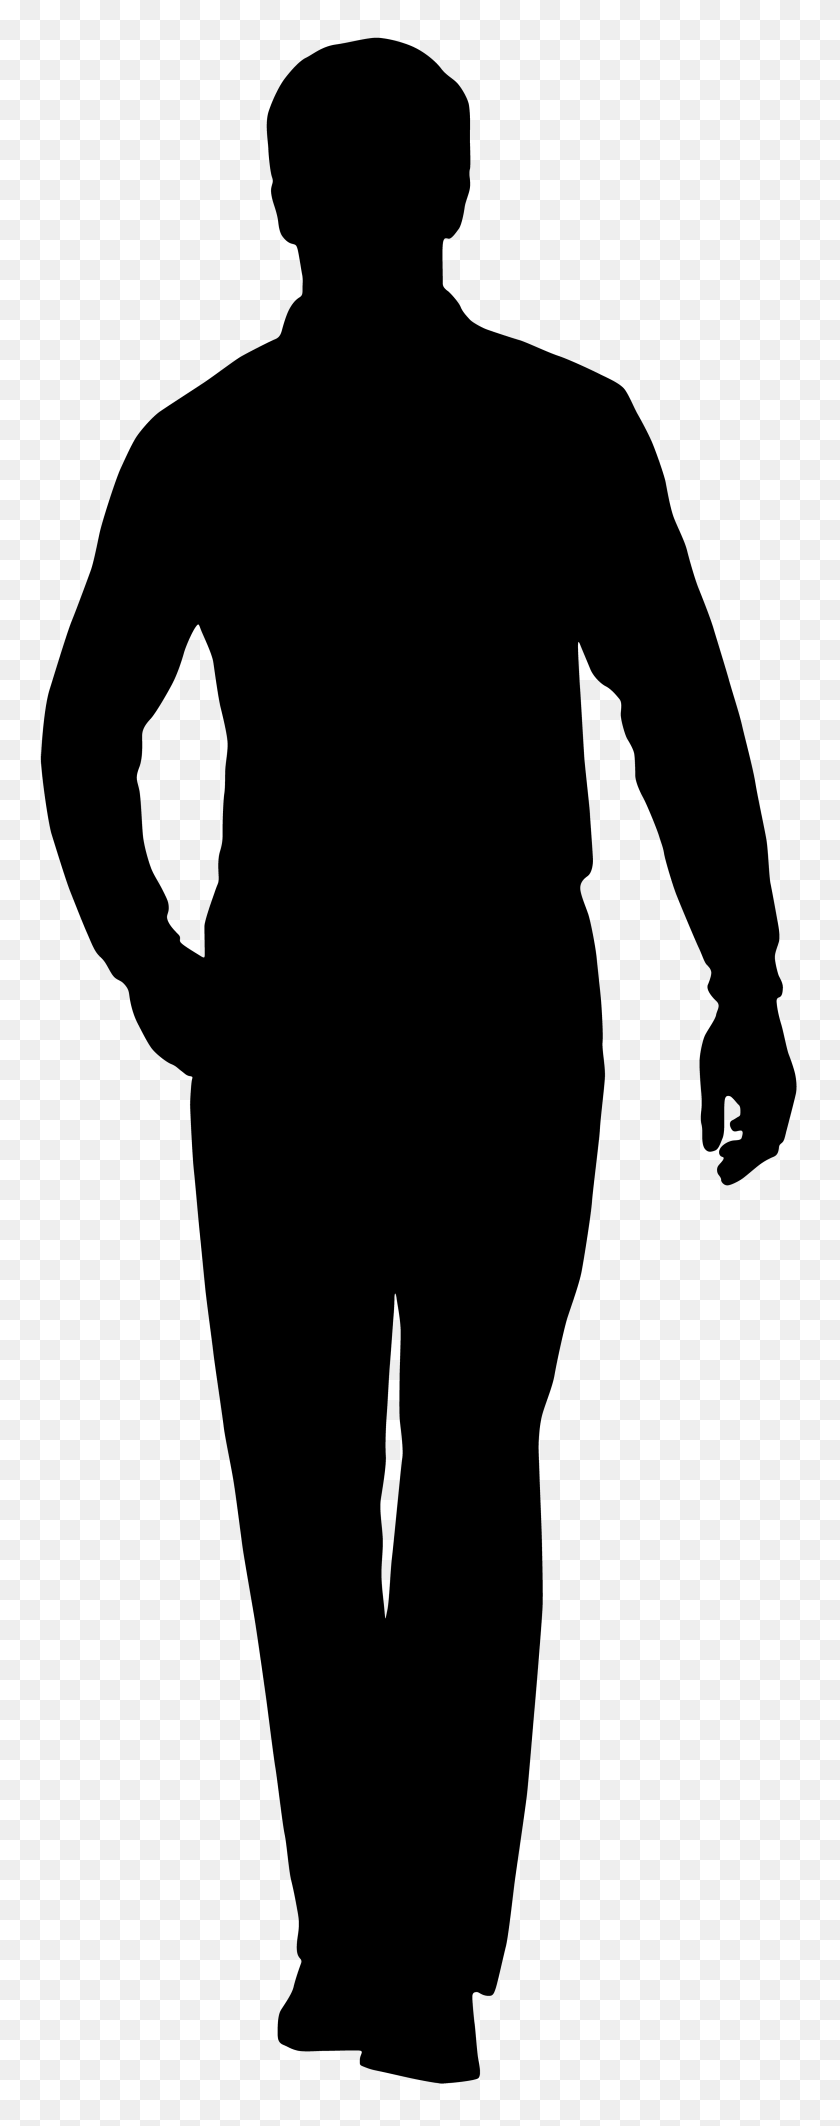 Men Silhouette Png Pic - PNG Silhouette - FlyClipart